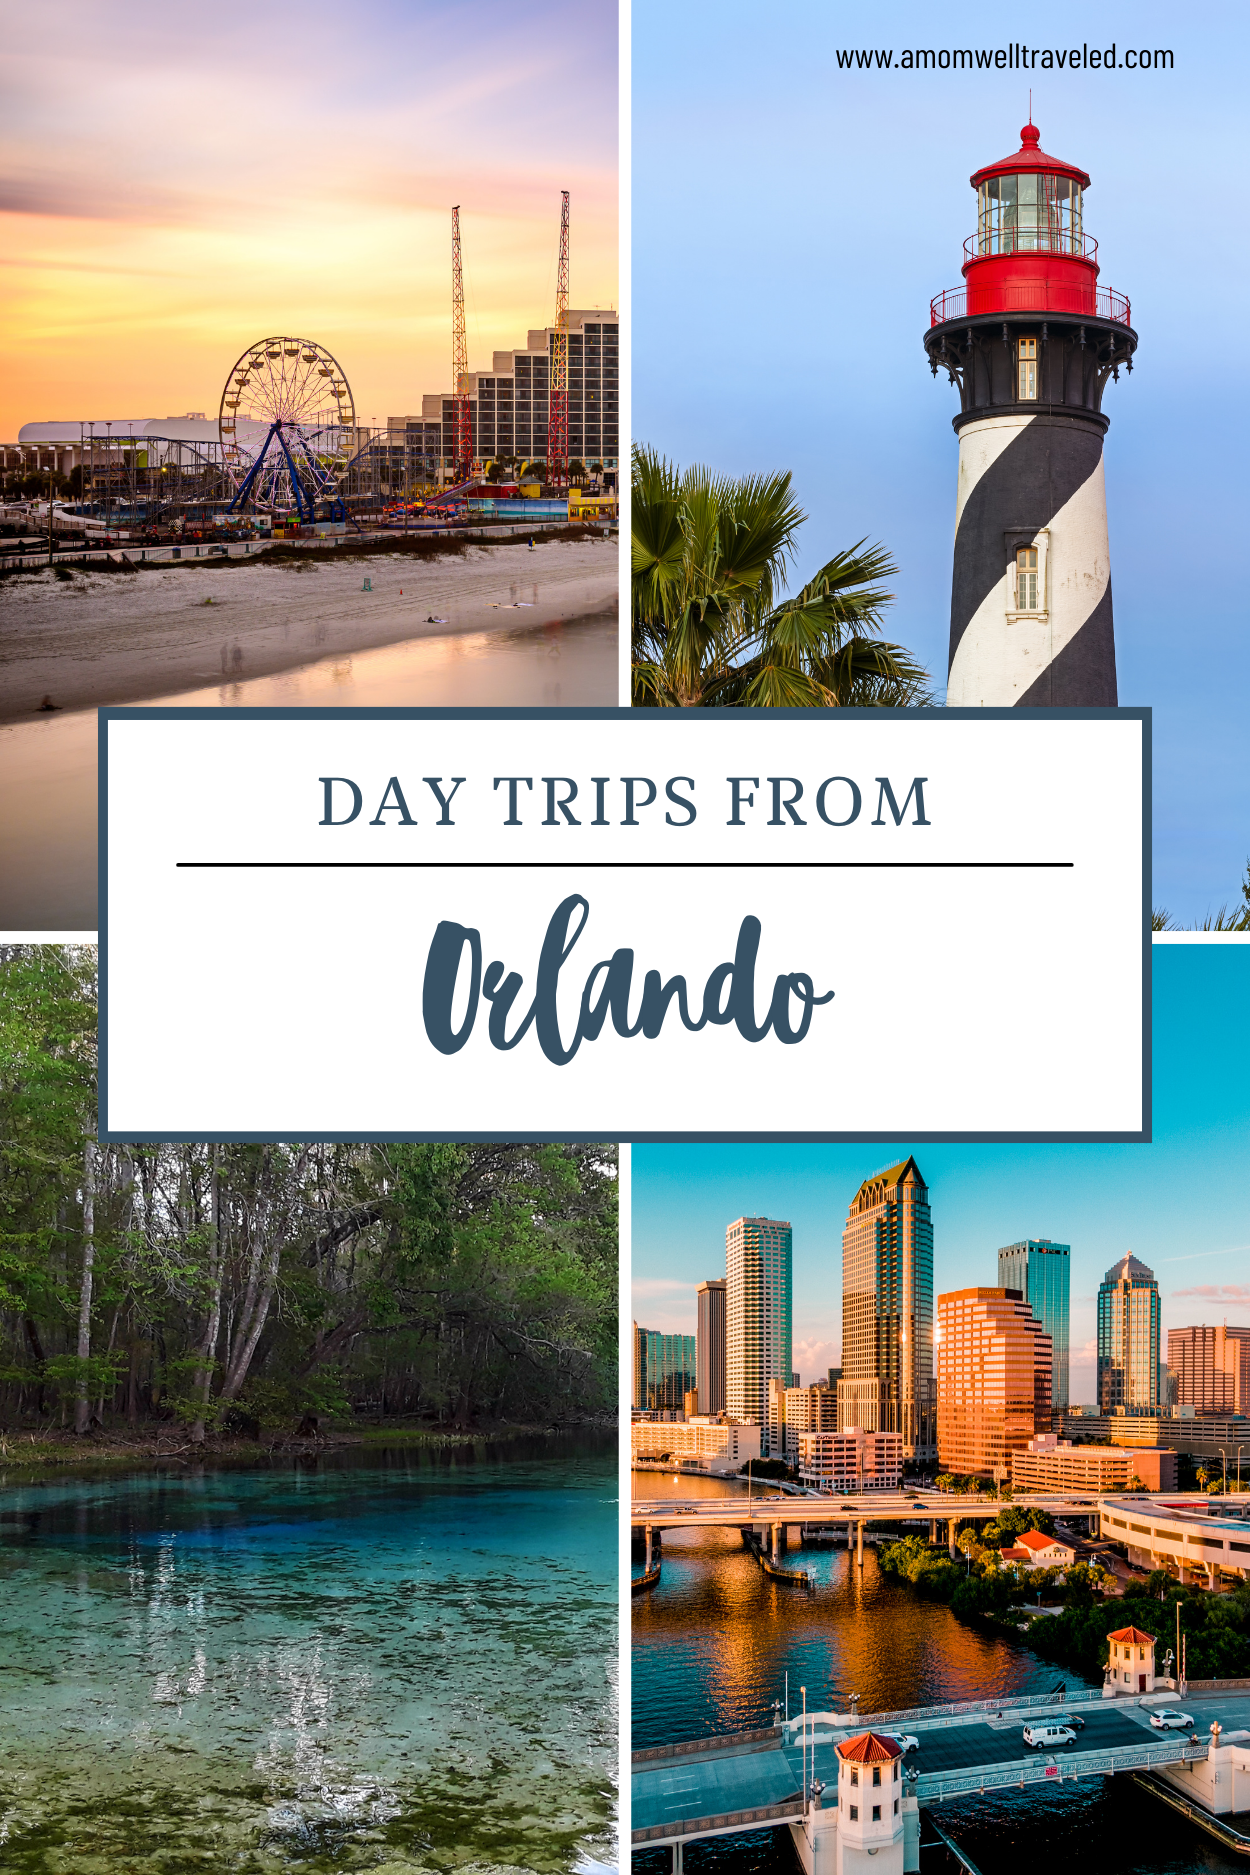 Best day trips from Orlando for couples and families